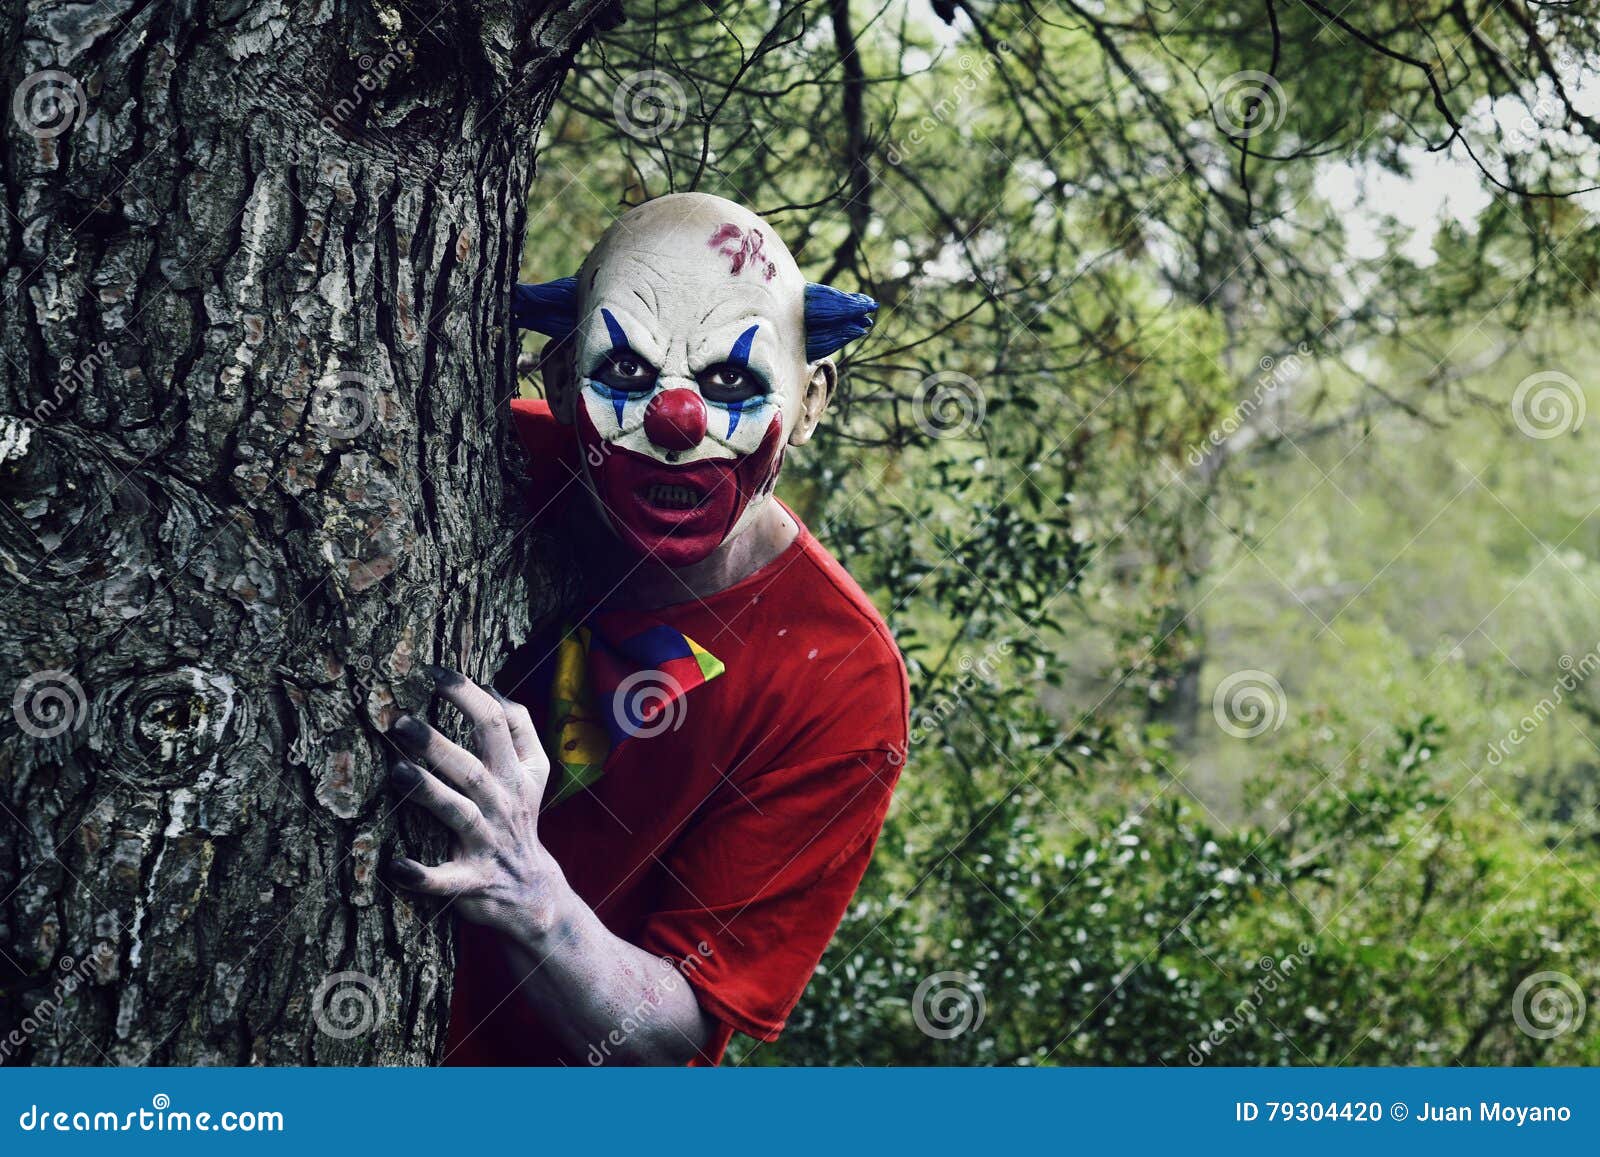 ligning præmedicinering Databasen Scary Evil Clown in the Woods Stock Photo - Image of holiday, evil: 79304420